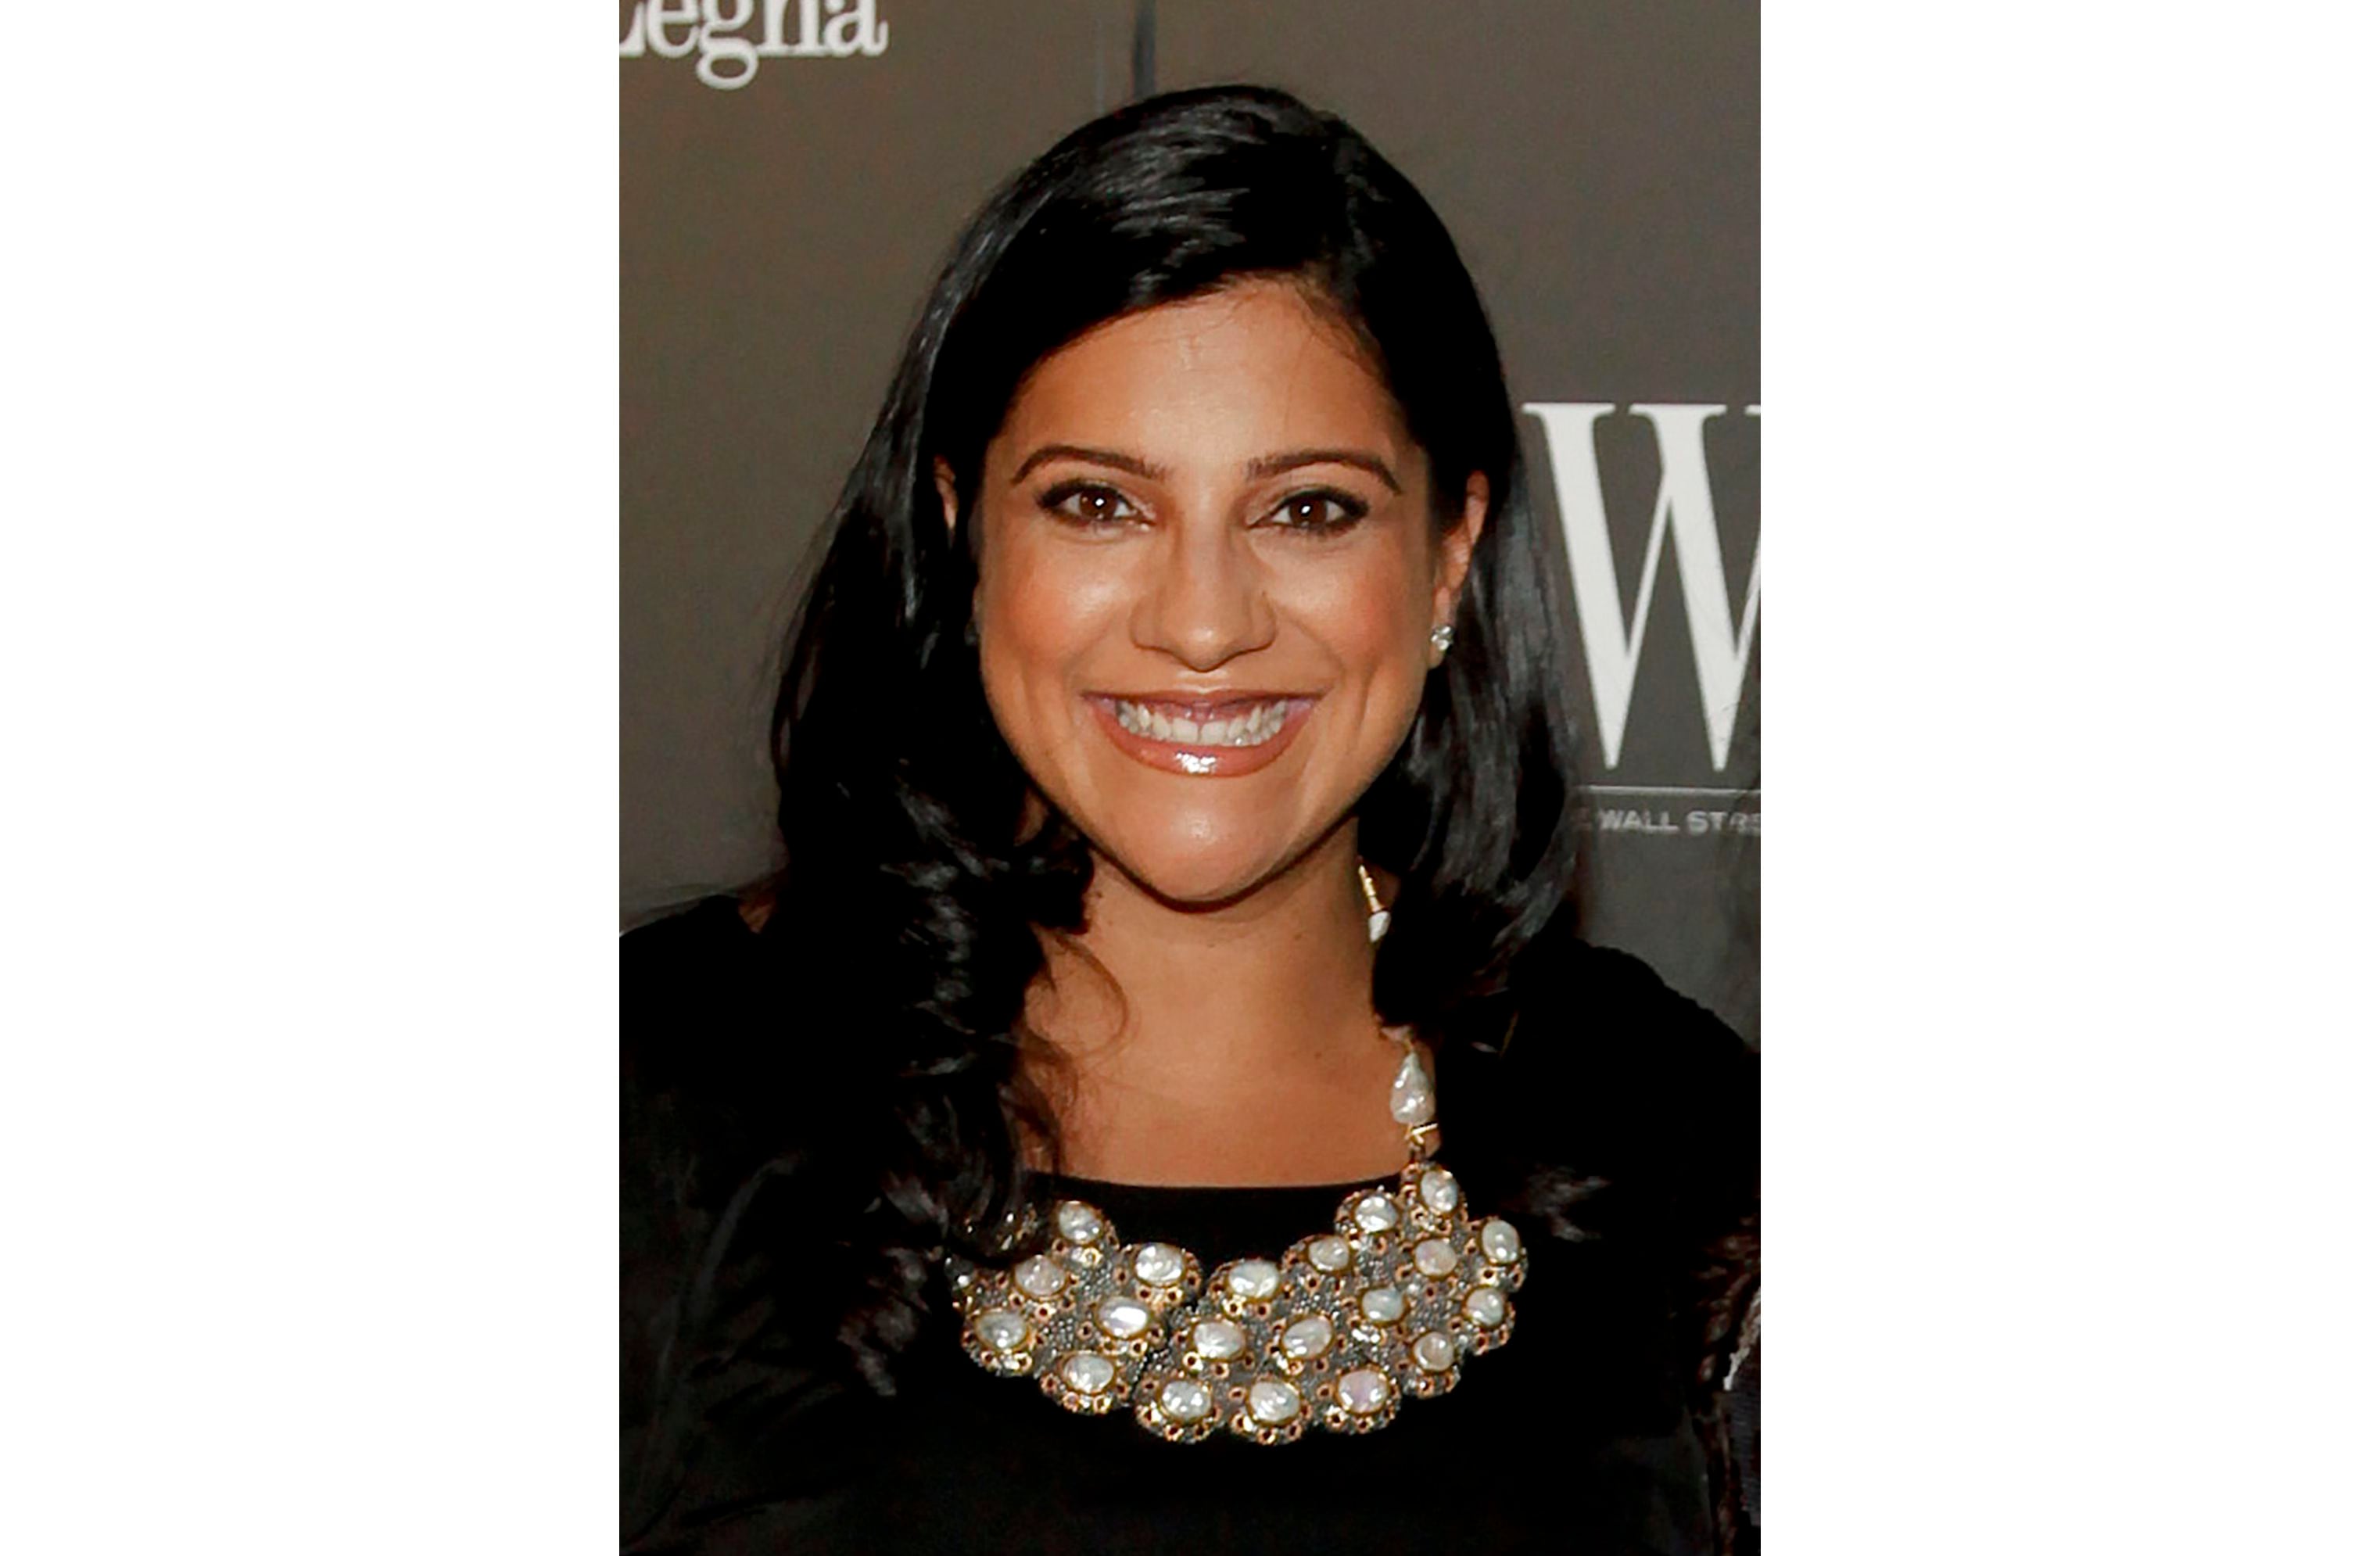 Reshma Saujani’s book ‘Pay Up’ urges support for mothers